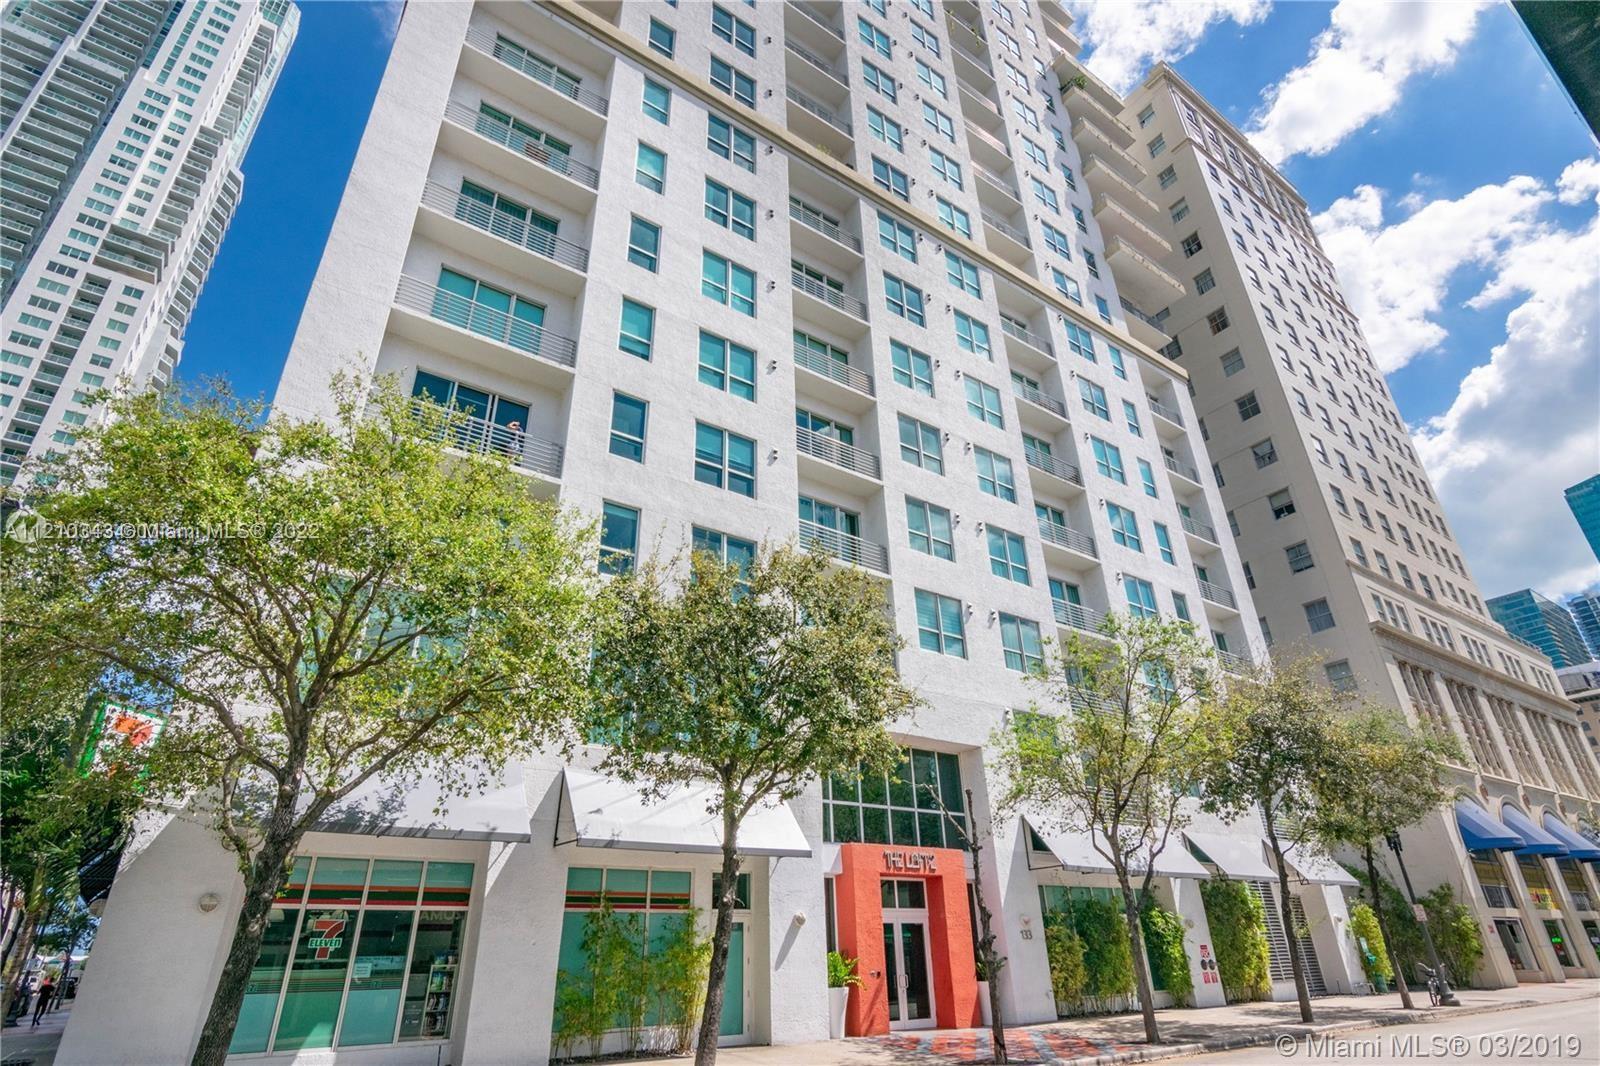 AMAZING LOCATION IN THE HEART OF DOWNTOWN MIAMI, SPACIOUS 2/2 WITH BEAUTIFUL VIEWS FORM THE 15TH FLOOR. CONCRETE FLOORS THROUGHOUT, OPEN KITCHEN / DINING AREA WITH STAINLESS STEEL APPLIANCES, PLENTY OF CABINETS, GRANITE COUNTER TOPS, LIVING ROOM WITH PLENTY OF NATURAL LIGHT, 10FT CEILINGS, STACK WASHER & DRYER IN UNIT, FULL BATHROOMS WITH MARBLE COUNTER TOPS, SHOWER AND TUB COMBINATION. AMAZING AMENITIES INCLUDING ROOF TOP POOL CURRENTLY UNDER CONSTRUCTION TO BE RE-OPENED THIS SUMMER, LOWER GROUND LAP POOL, FITNESS CENTER WITH SPECTACULAR SKYLINE VIEWS, SUANA, HOT TUB, CLUB ROOM WITH BILLIARDS, METRO MOVER ENTRANCE RIGHT OUTSIDE CONDO ENTRANCE, STEPS FROM BAYFRONT PARK, MIAMI DADE COMMUNITY COLLEGE, FTX ARENA, FORST MUSEUM, MINUTES FROM MIAMI BEACH & MUCH MORE. PLEASE READ BROKERS REMARKS!